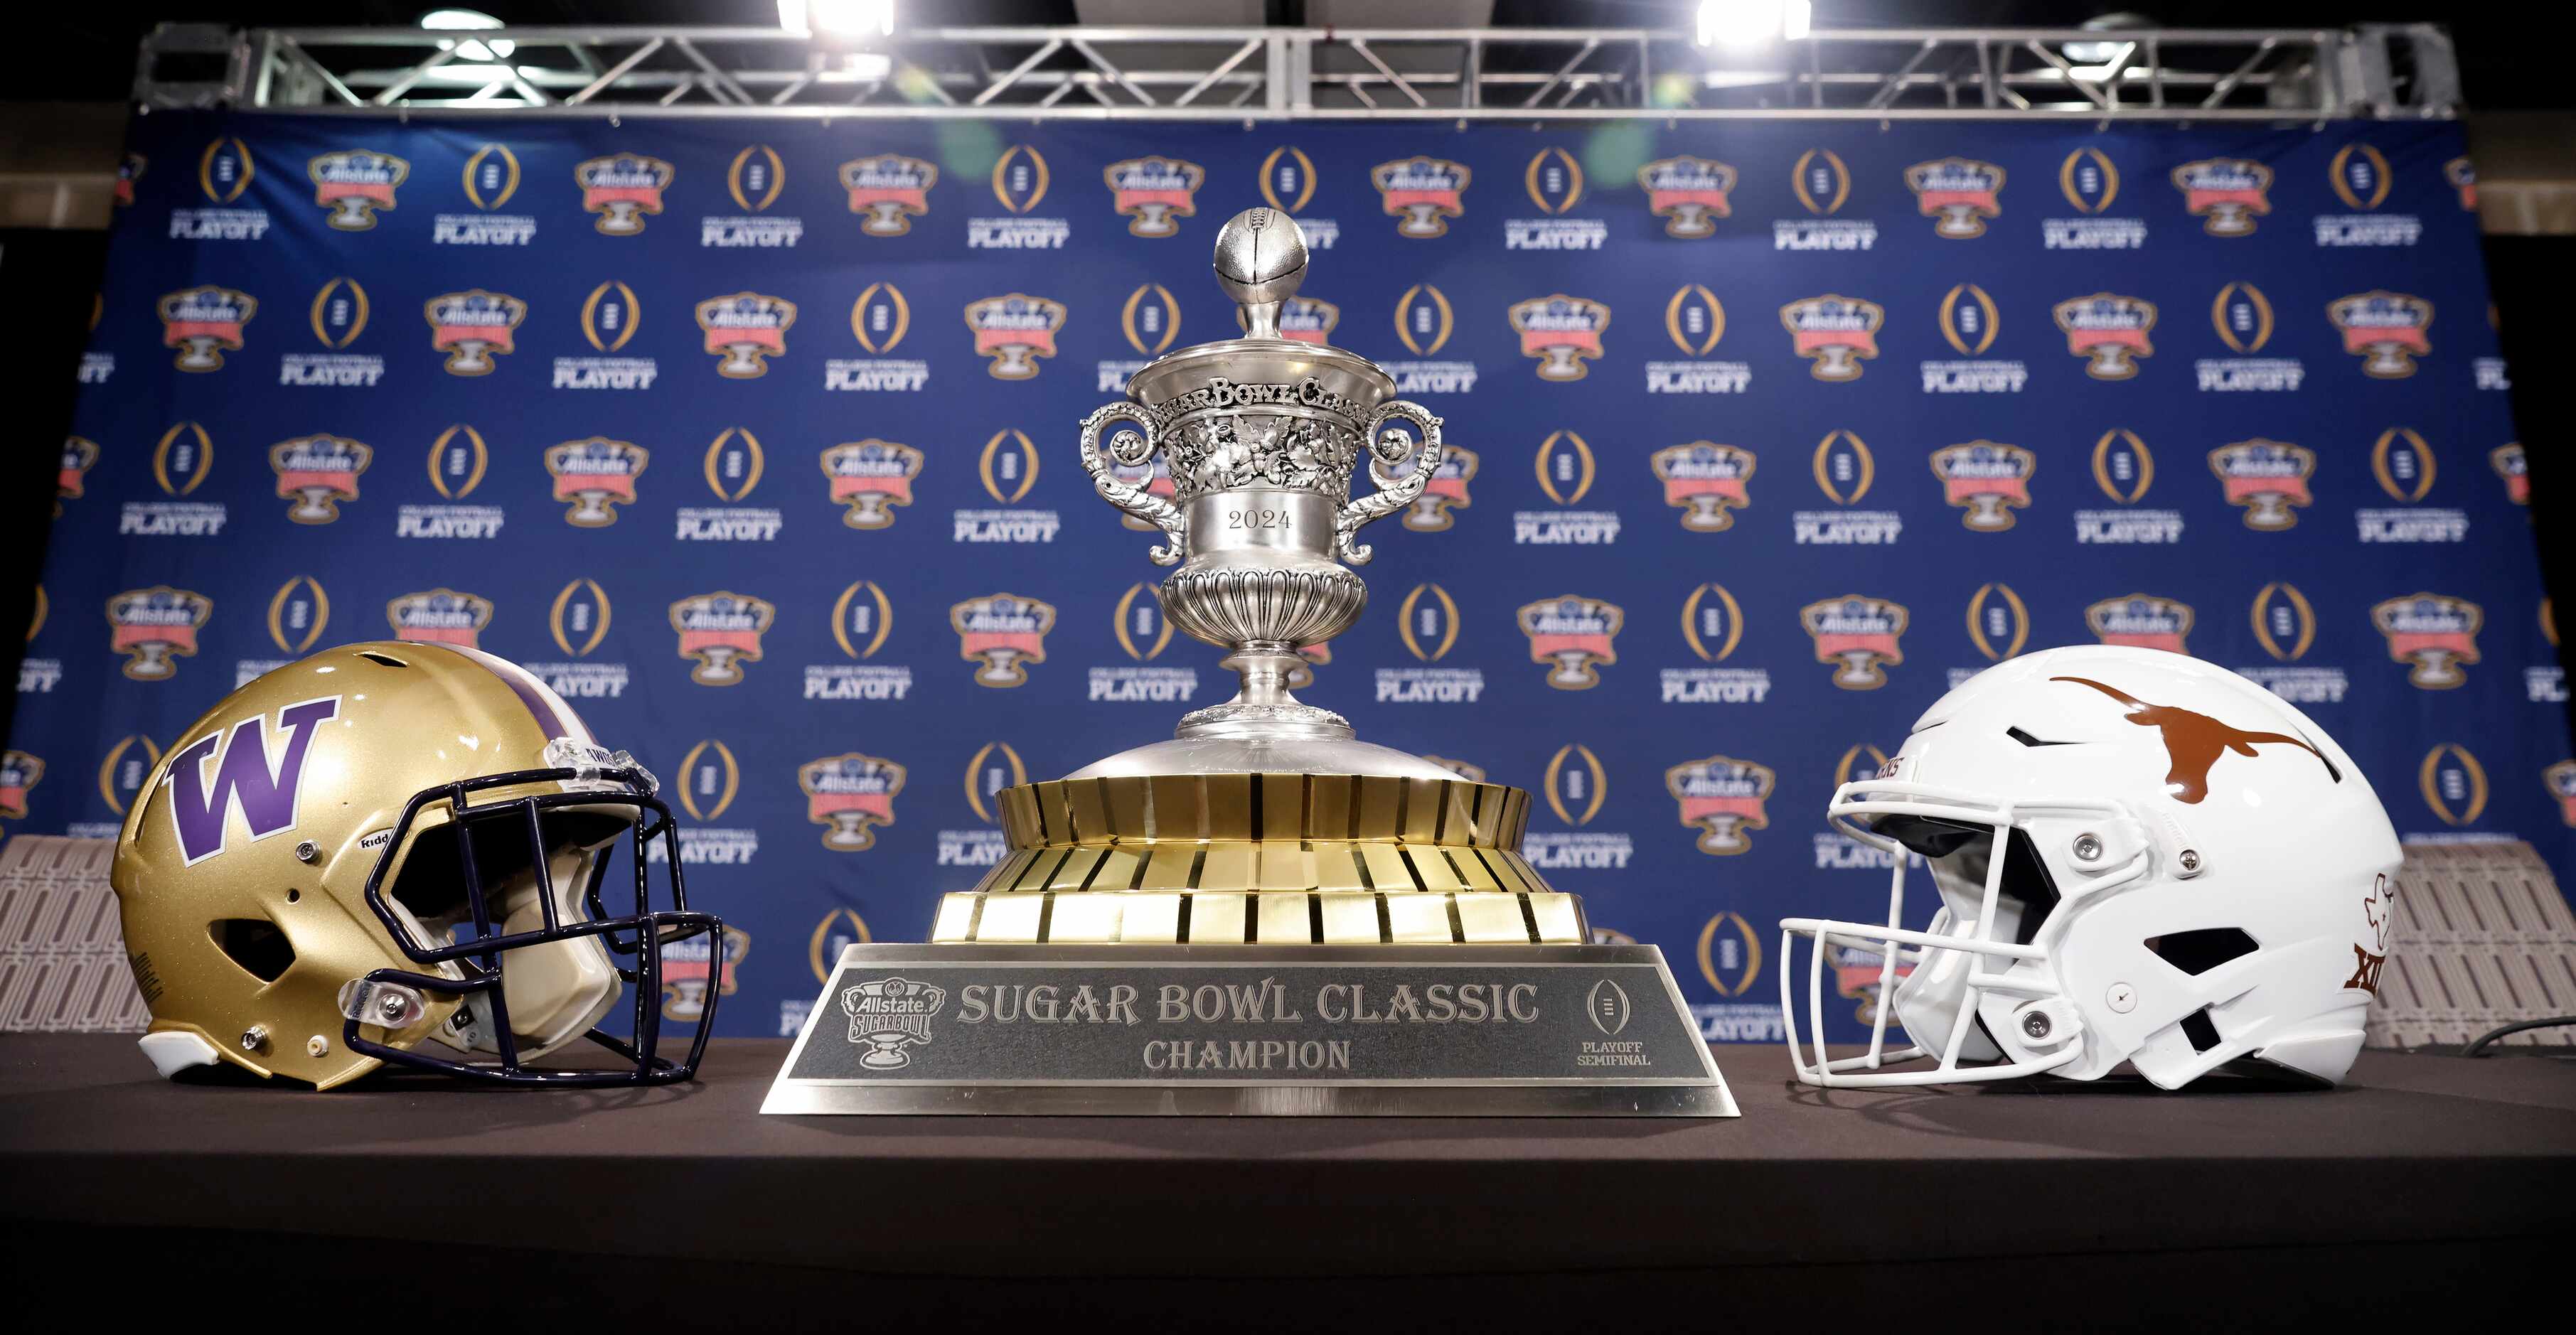 The helmets of the Washington Huskies Texas Longhorns face one another with the Sugar Bowl...